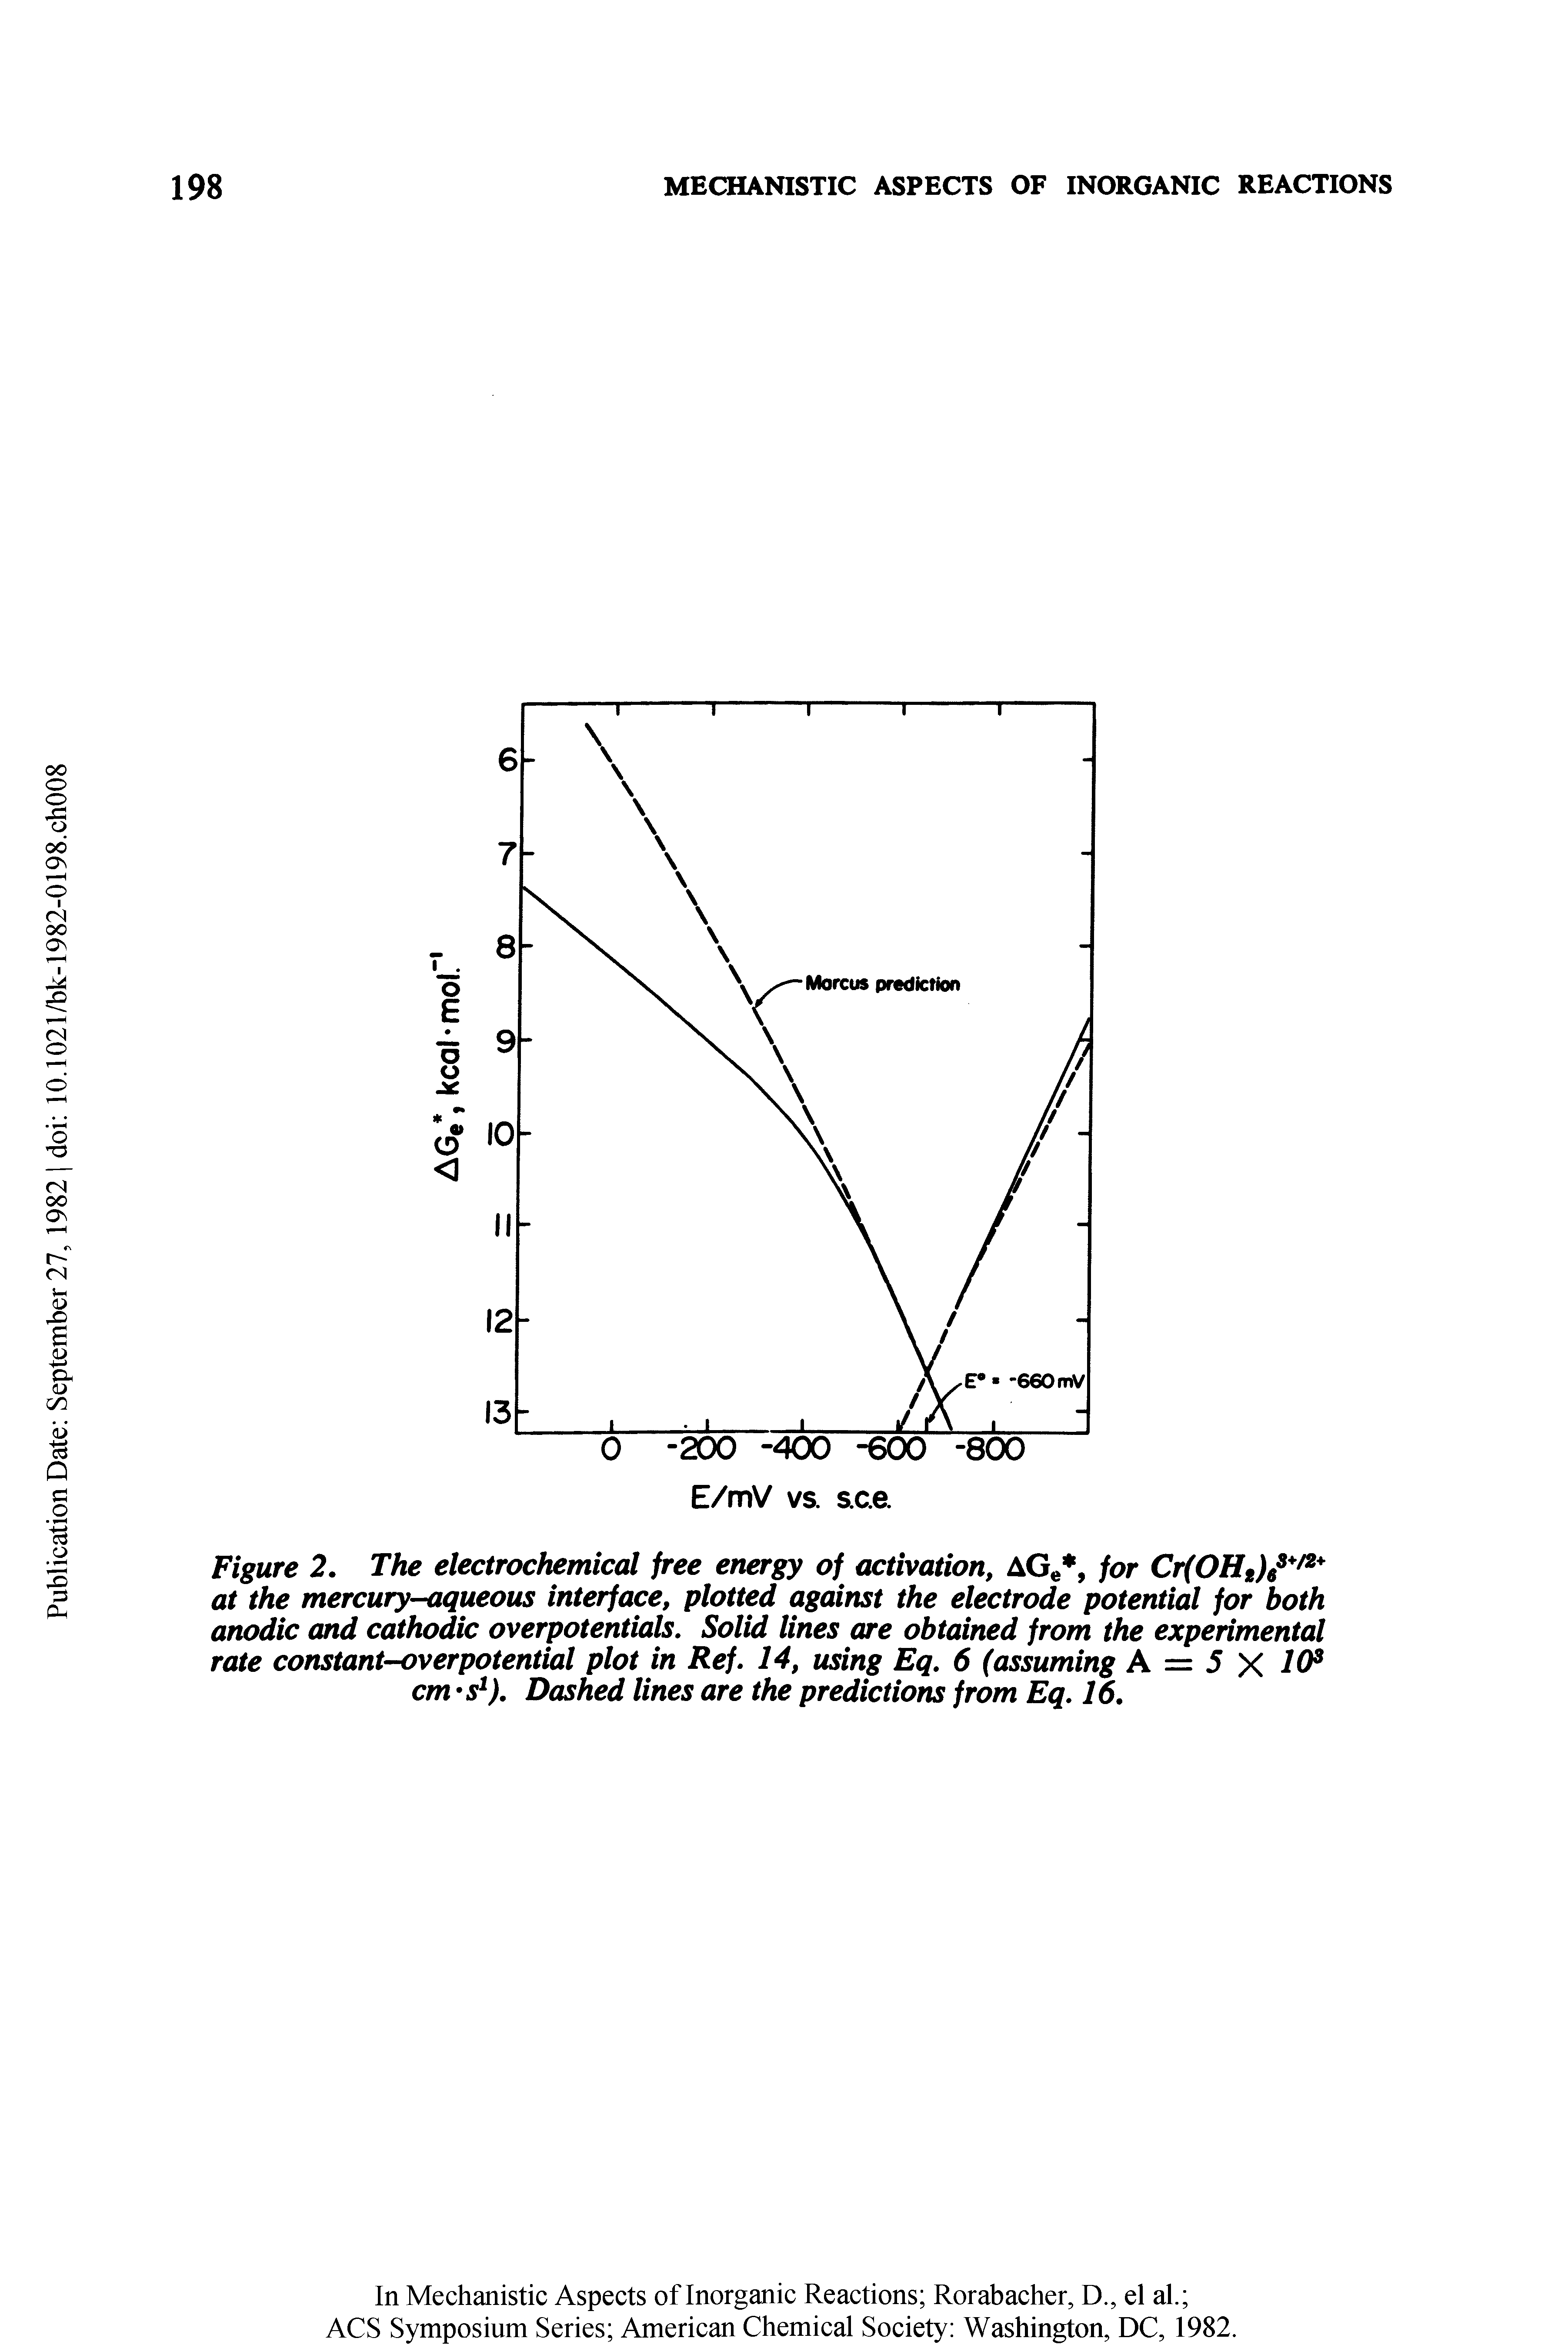 Figure 2. The electrochemical free energy of activation, AGe, for Cr(OHt)6s+/2+ at the mercury-aqueous interface, plotted against the electrode potential for both anodic and cathodic overpotentials. Solid lines are obtained from the experimental rate constant-overpotential plot in Ref. 14, using Eq. 6 (assuming A = 5 X 10s cm S1). Dashed lines are the predictions from Eq. 16.